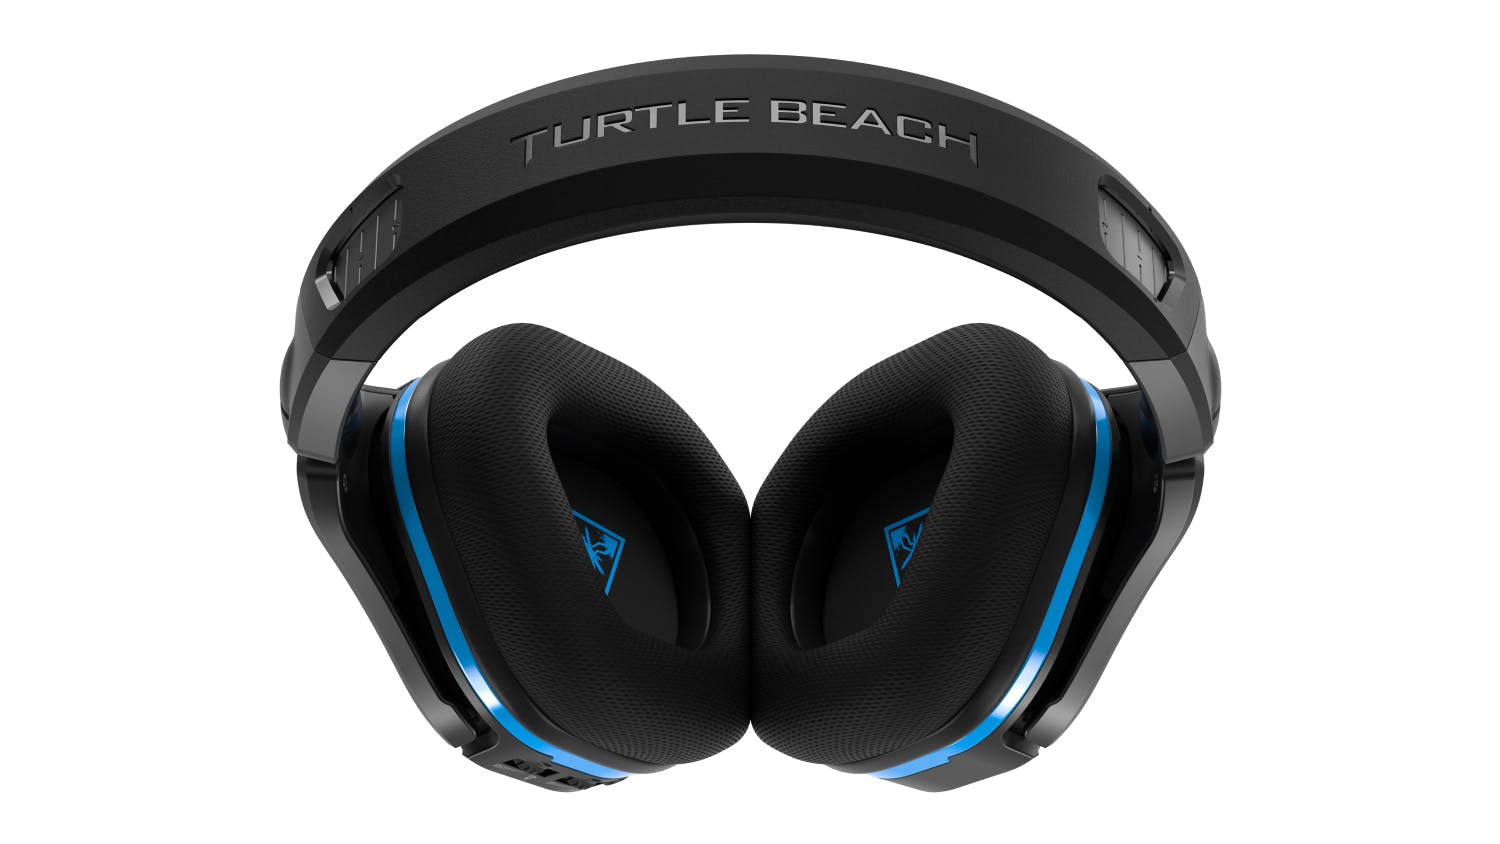 Turtle Beach Stealth 600P (Gen 2) Gaming Headset for PS4 - Black